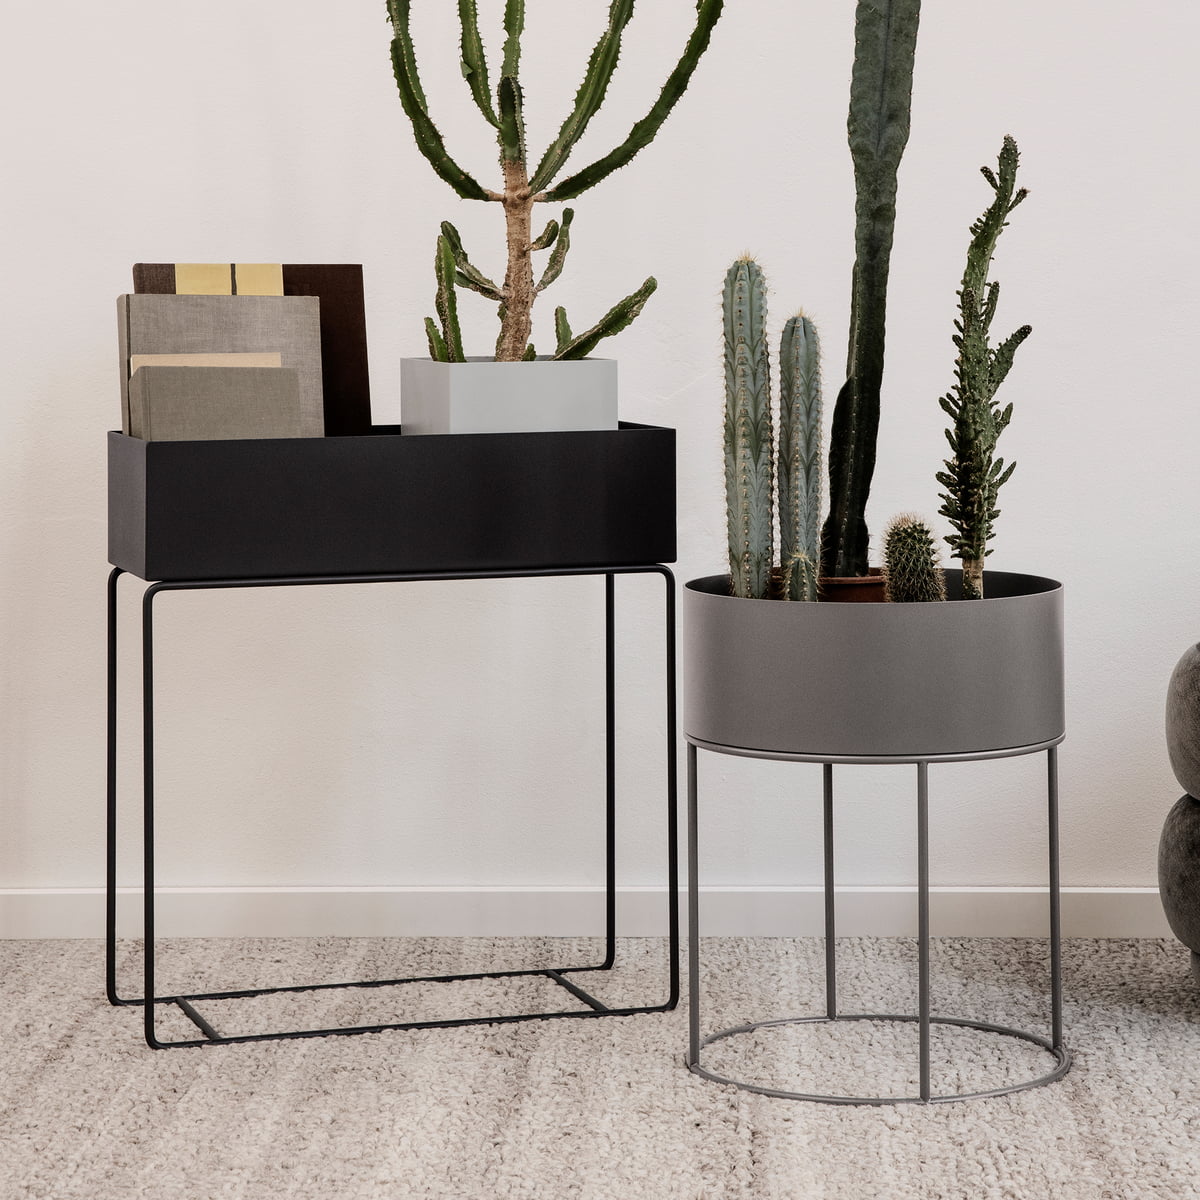 ferm LIVING - Product Overview SS22 by ferm LIVING - Issuu